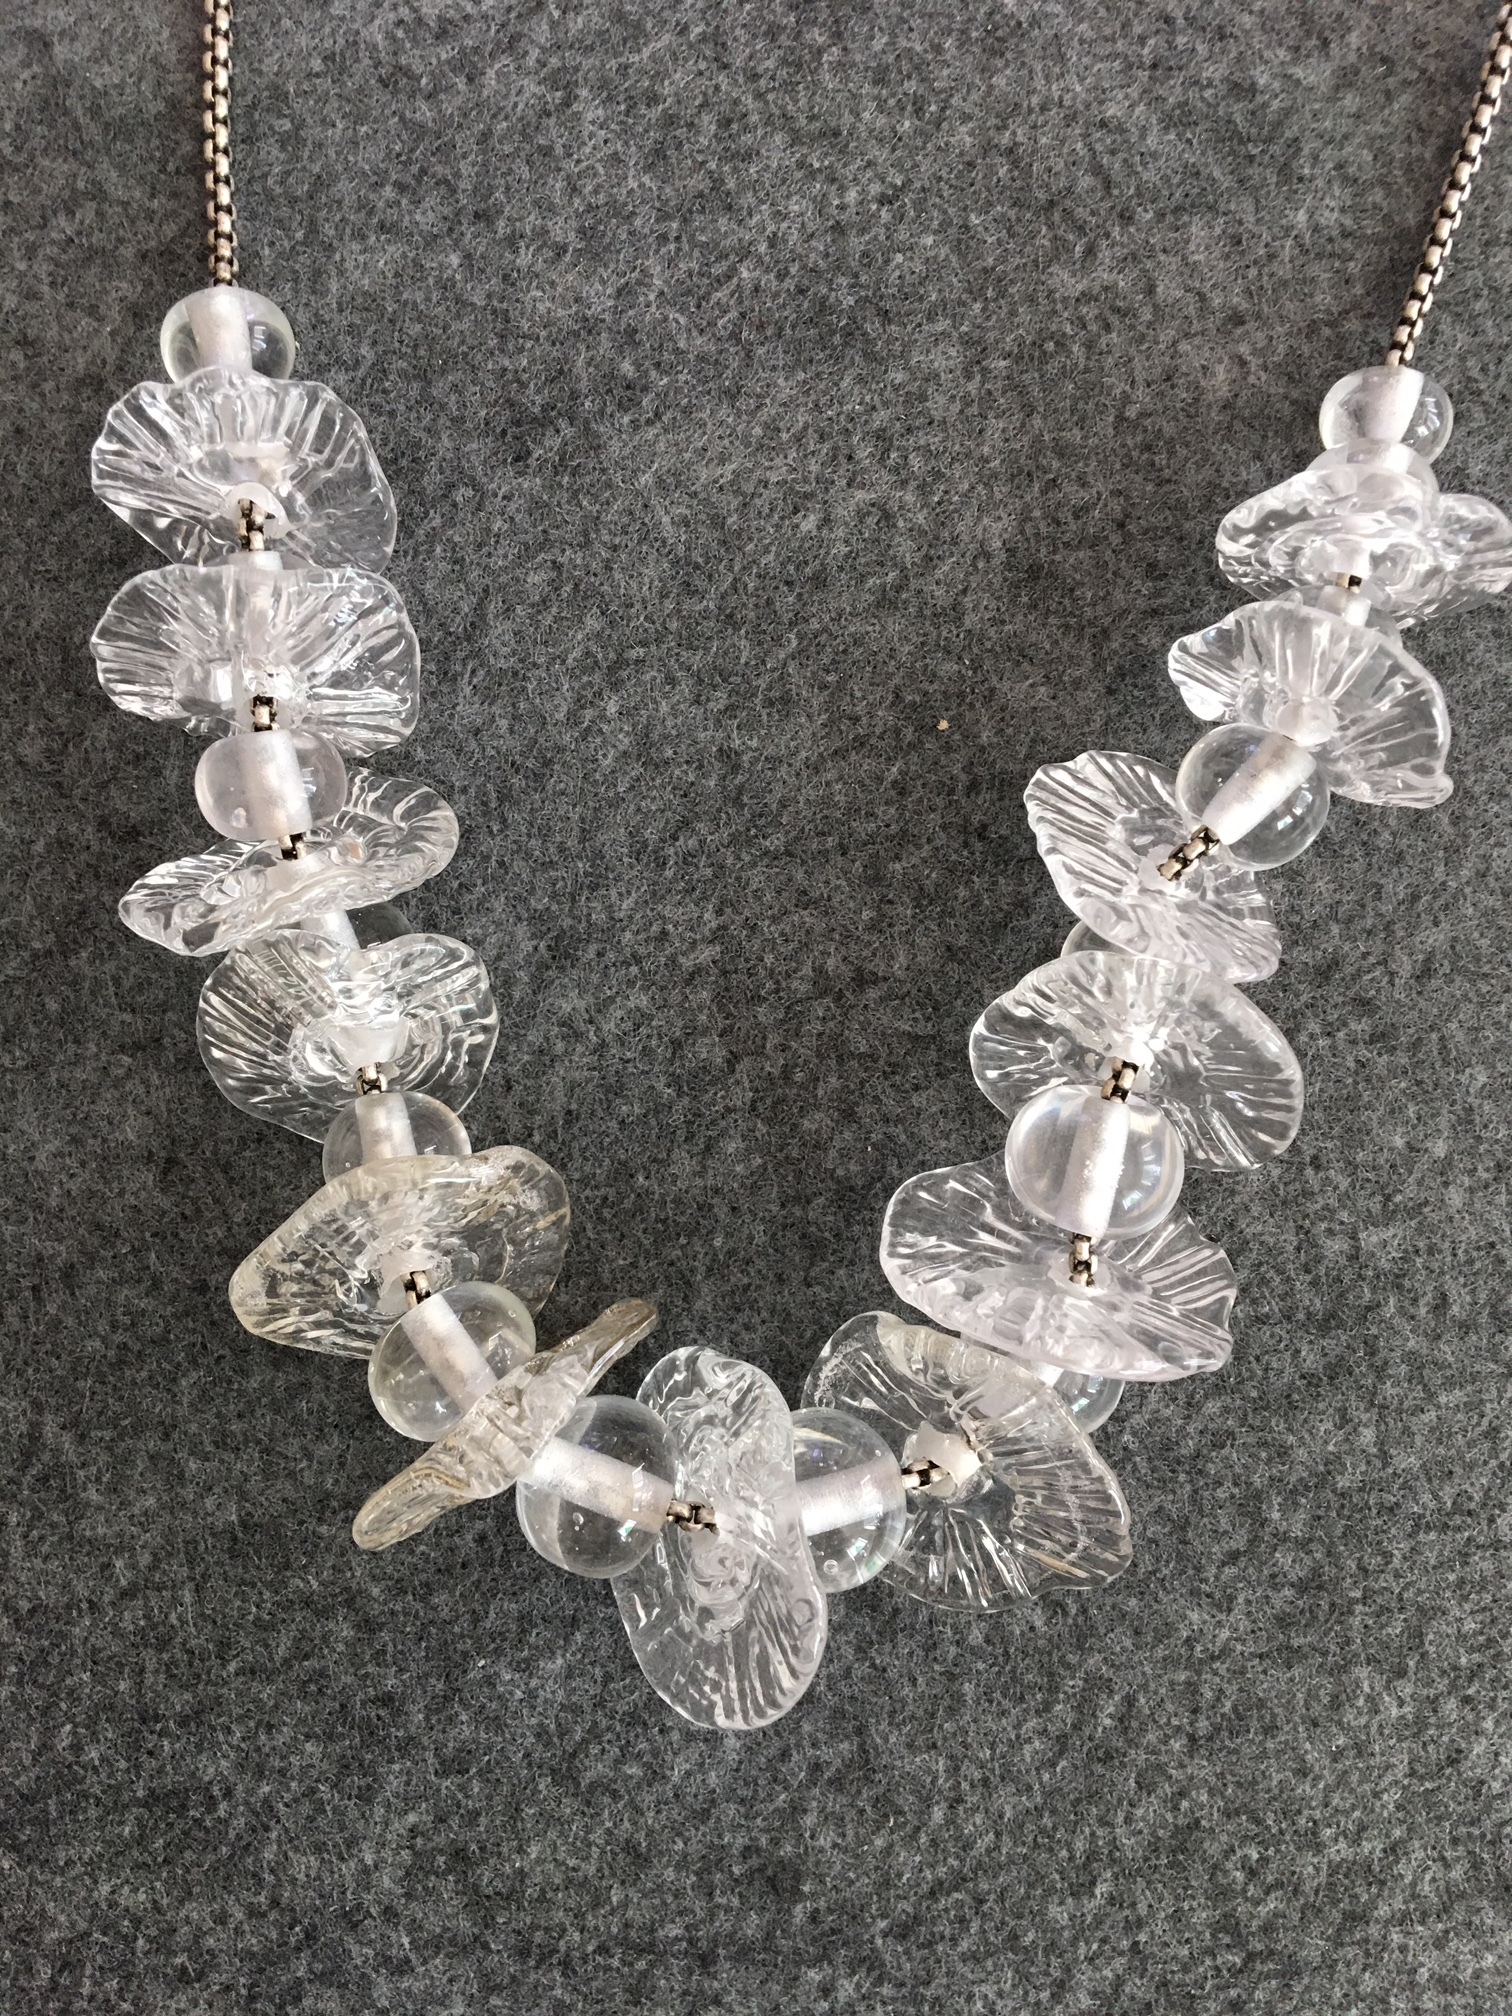 Handmade Glass Necklace, Crystal Ruffles, 22”, Silver Plate Chain, Sterling Clasp